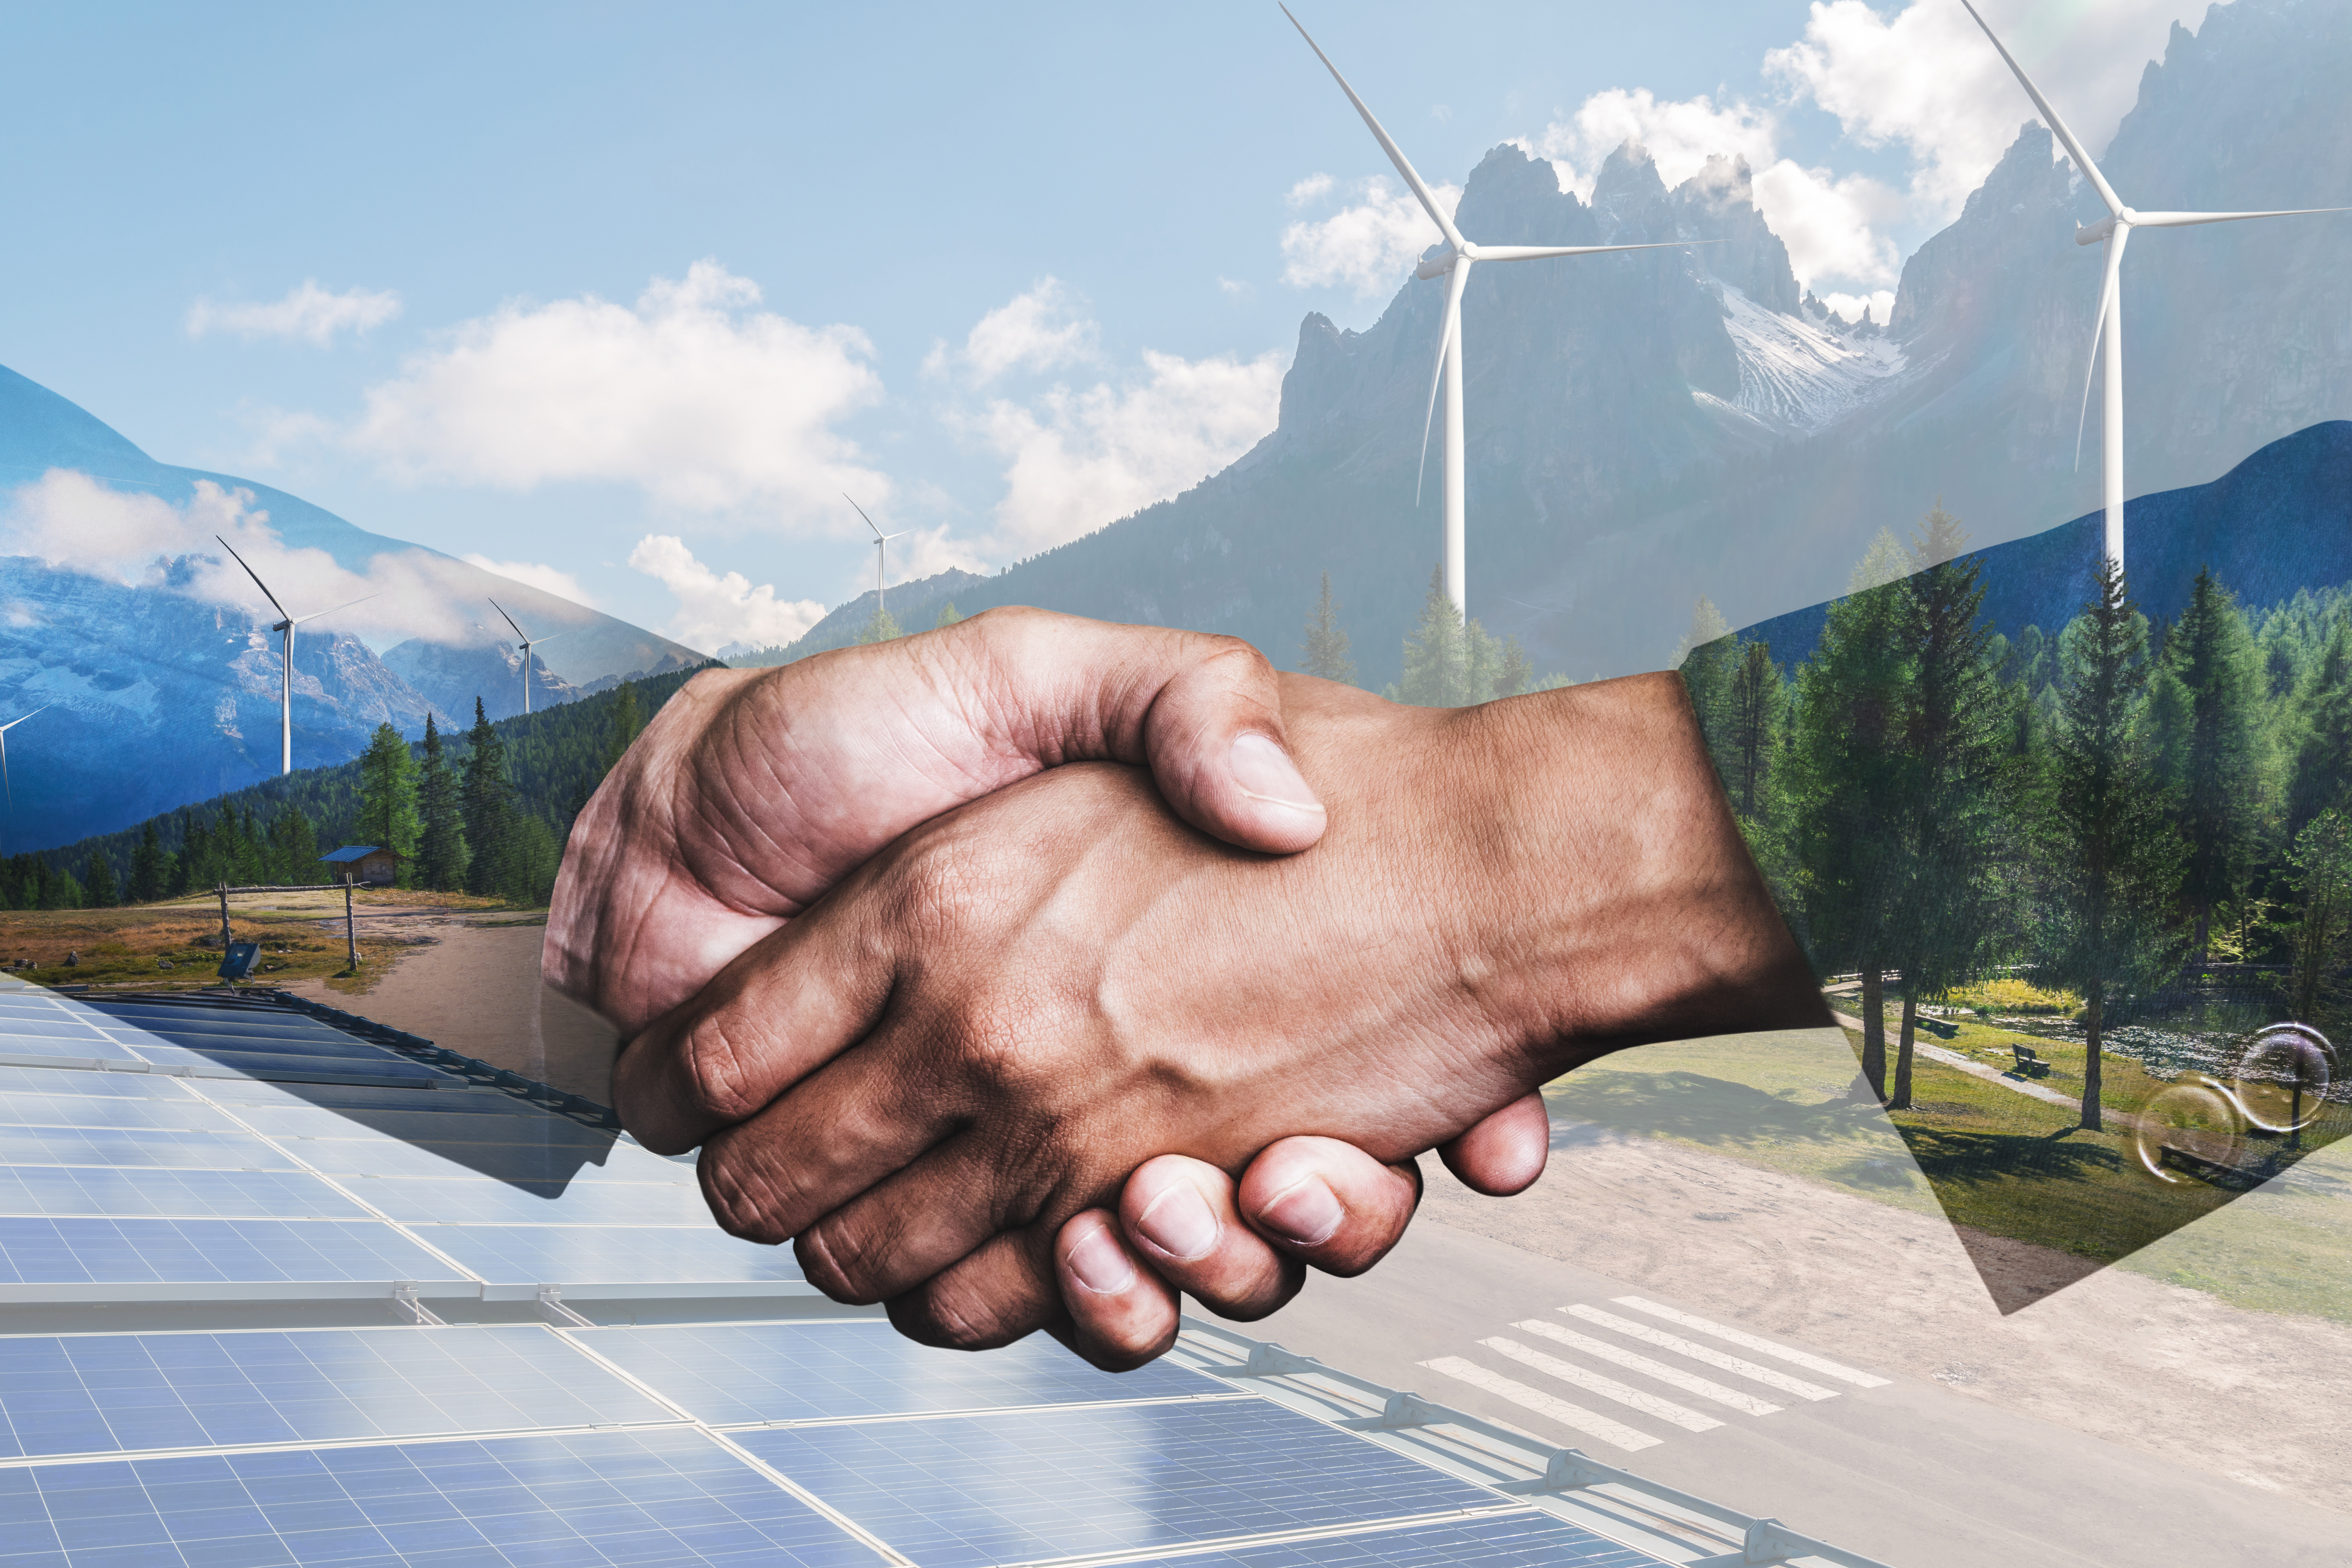 A background of a wind turbine farm in view of a handshake.